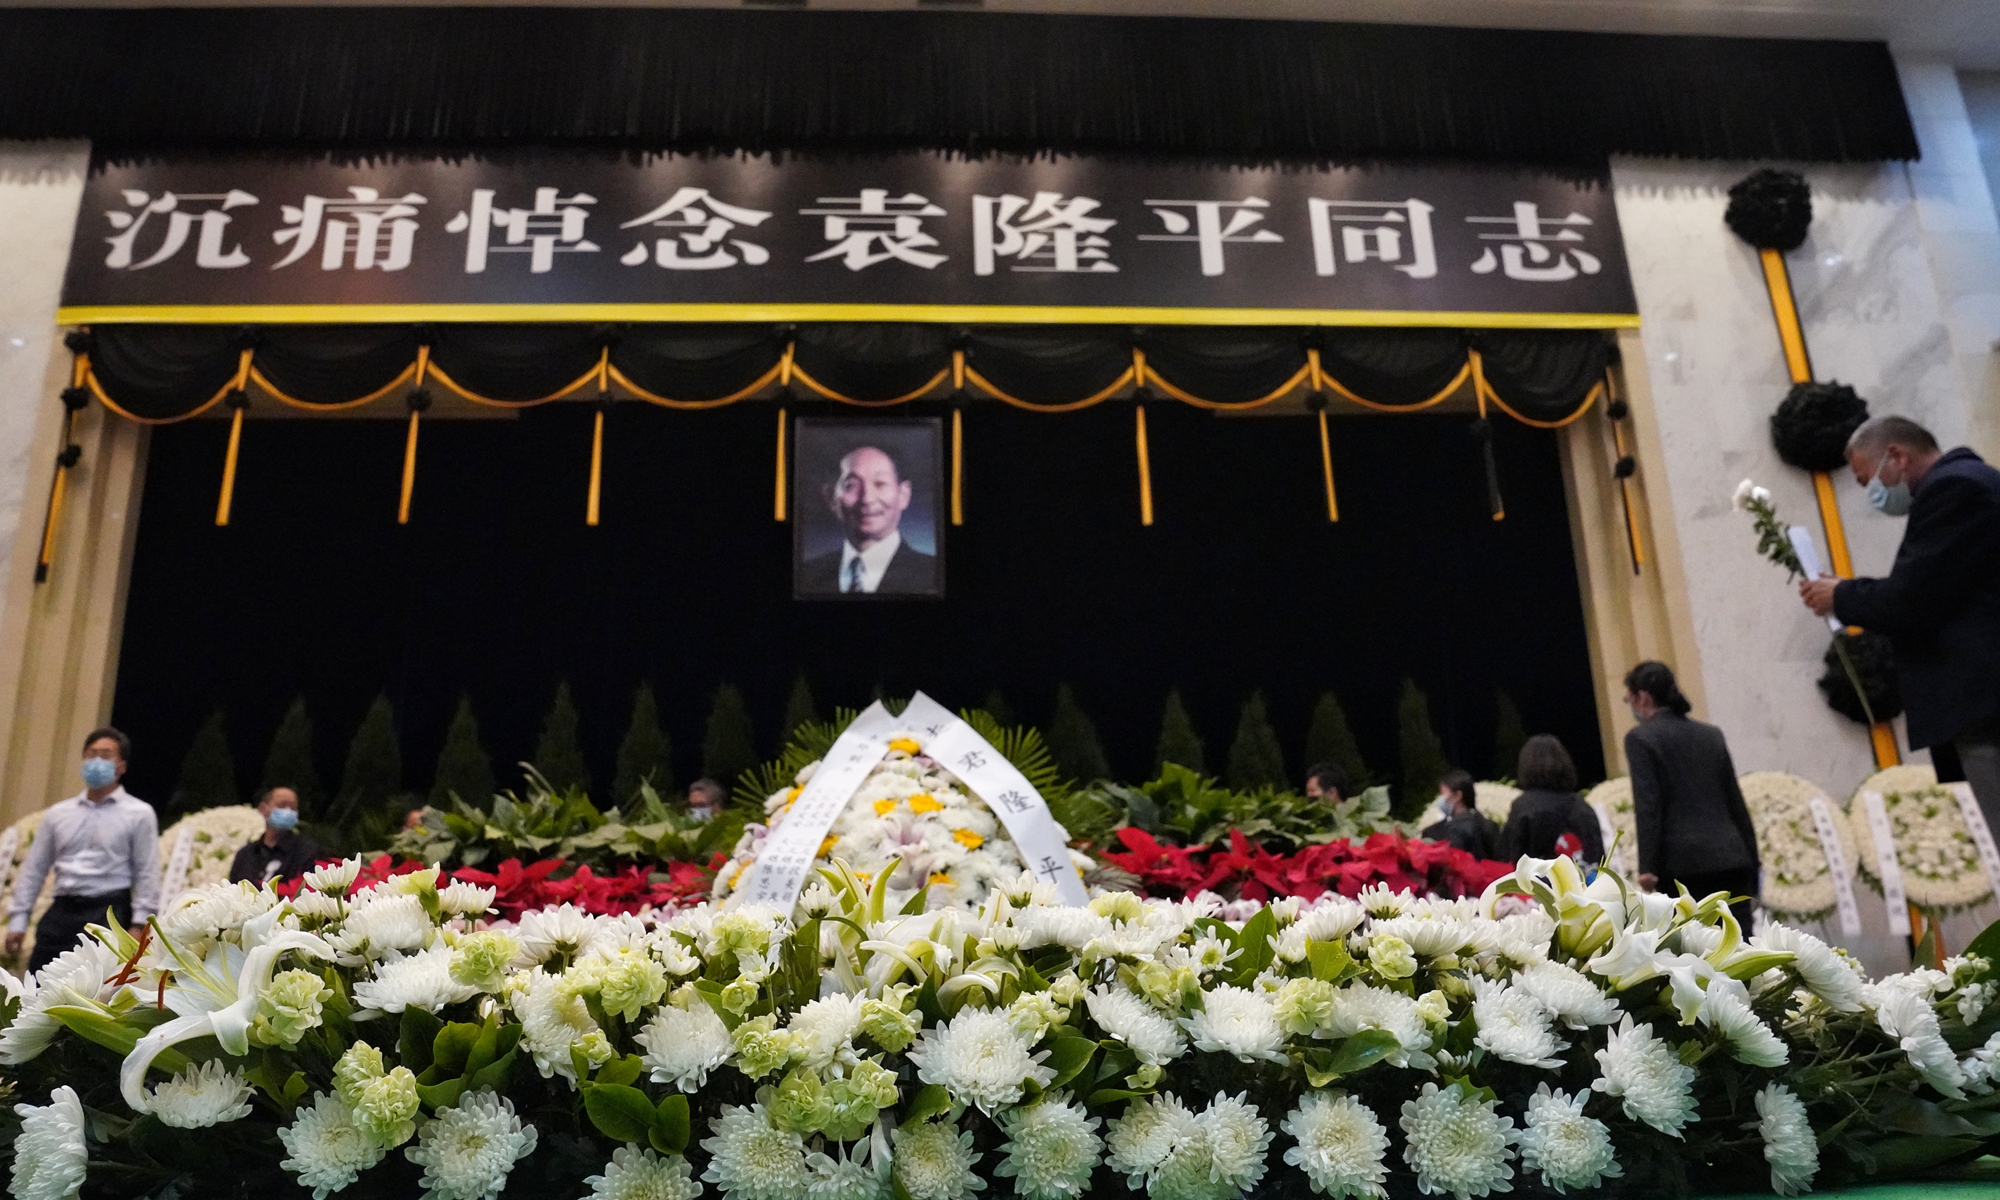 The funeral of Professor Yuan Longping is held at Mingyangshan Funeral Home in Changsha, Central China's Hunan Province on Monday. Thousands of people went there with flowers to show their respect. Yuan passed away on Saturday at the age of 91. Photo: Cui Meng/GT